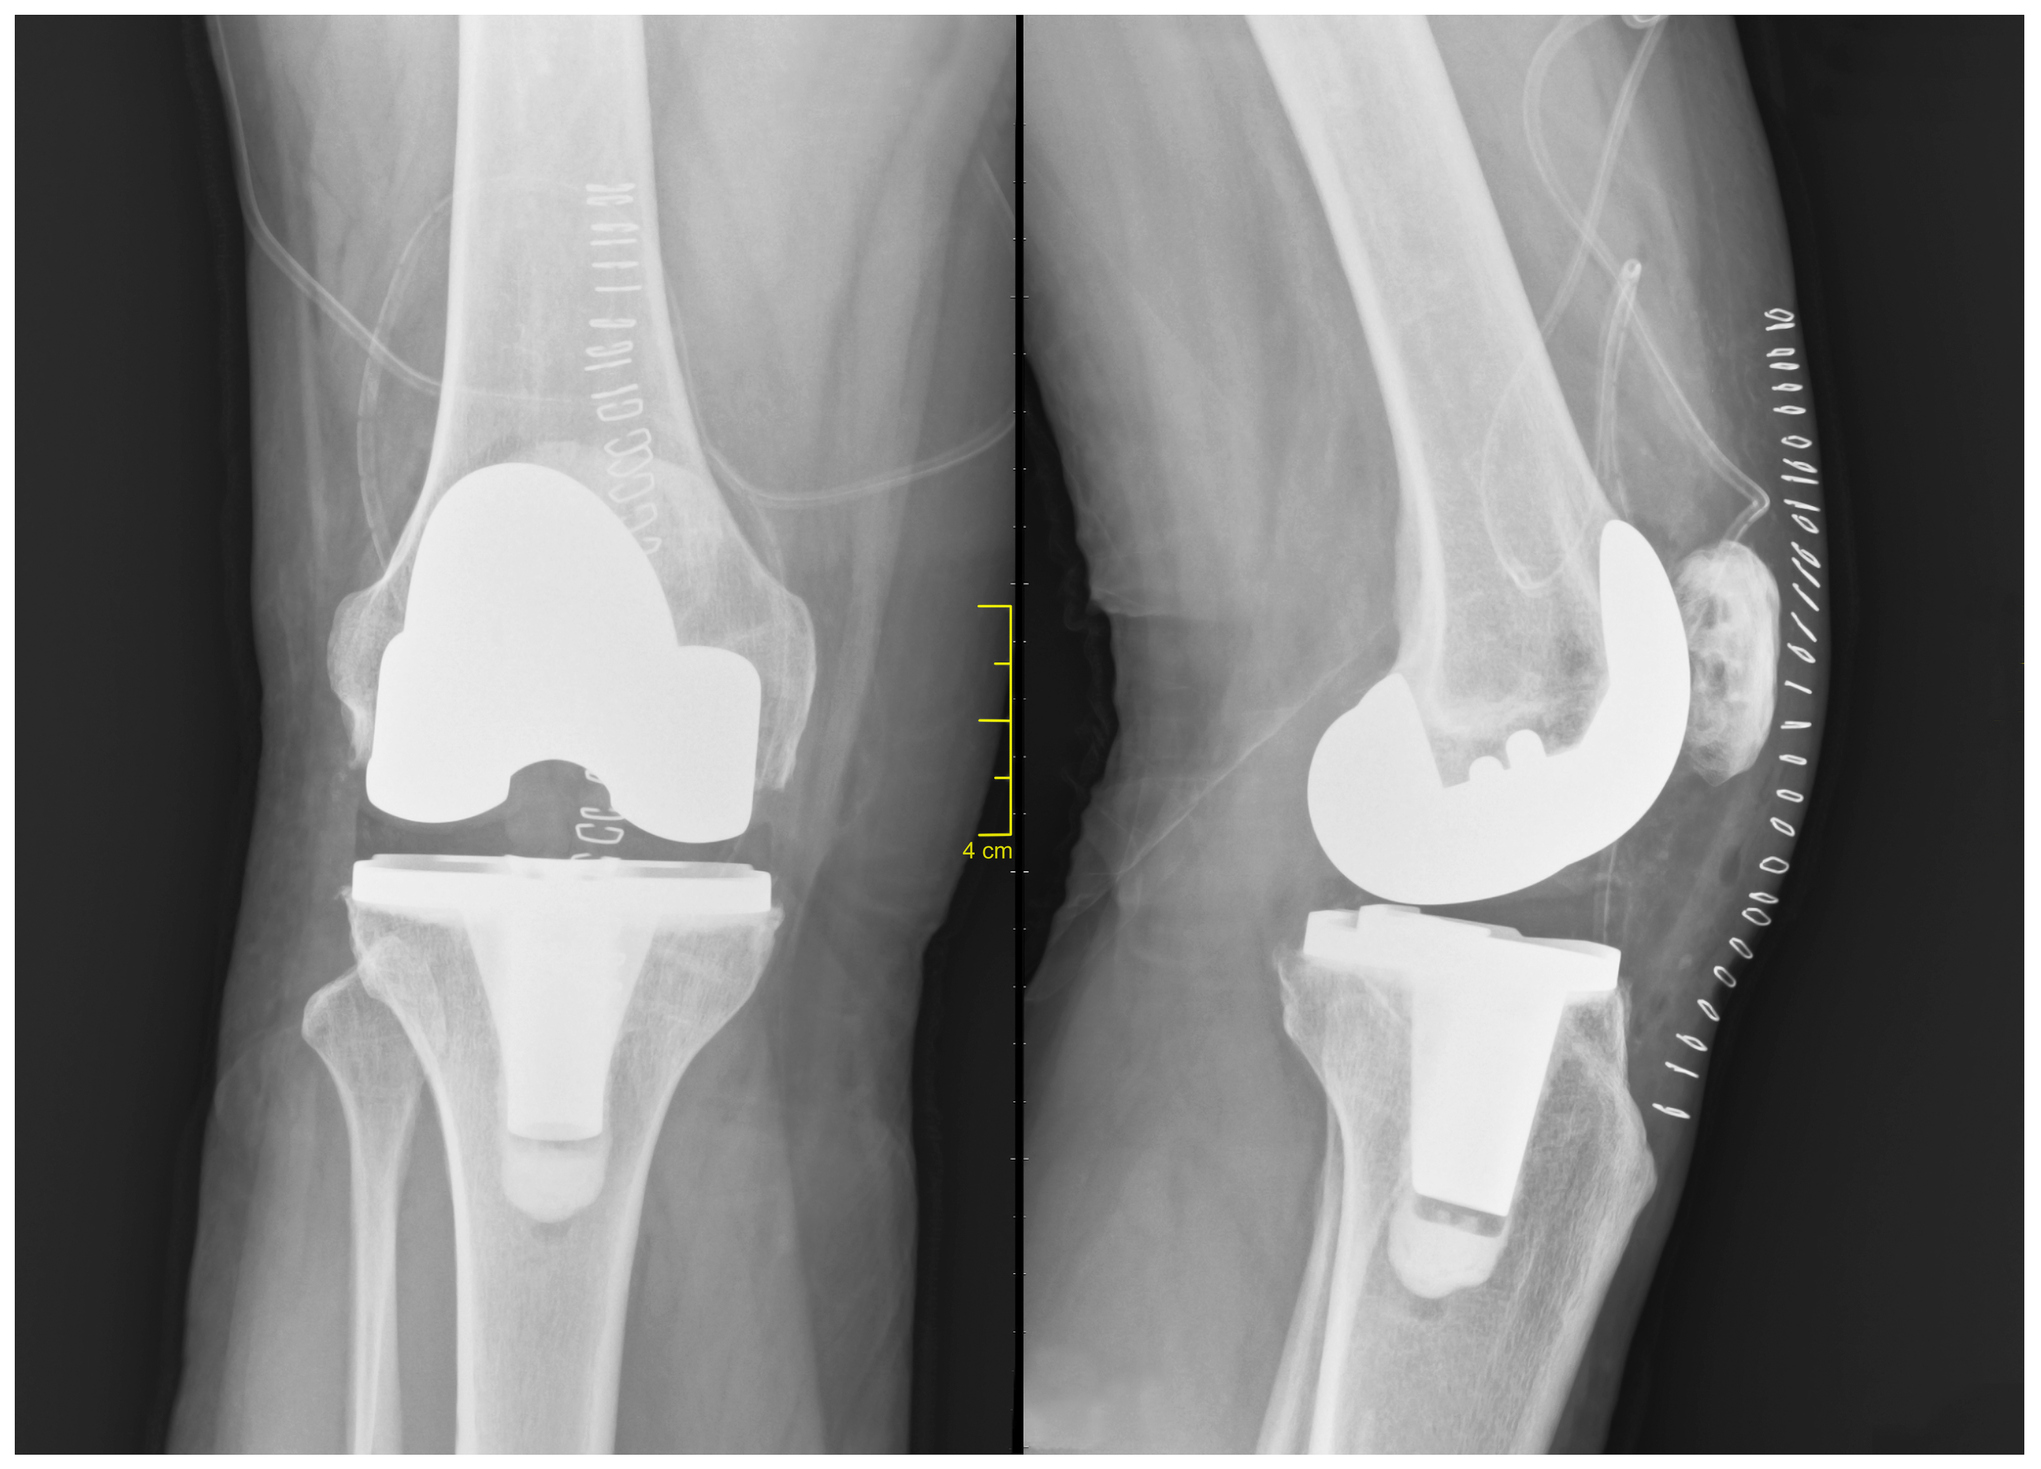 Top 5 Post-Knee Replacement Surgery Errors for a Smooth Recovery and Minimized Complications